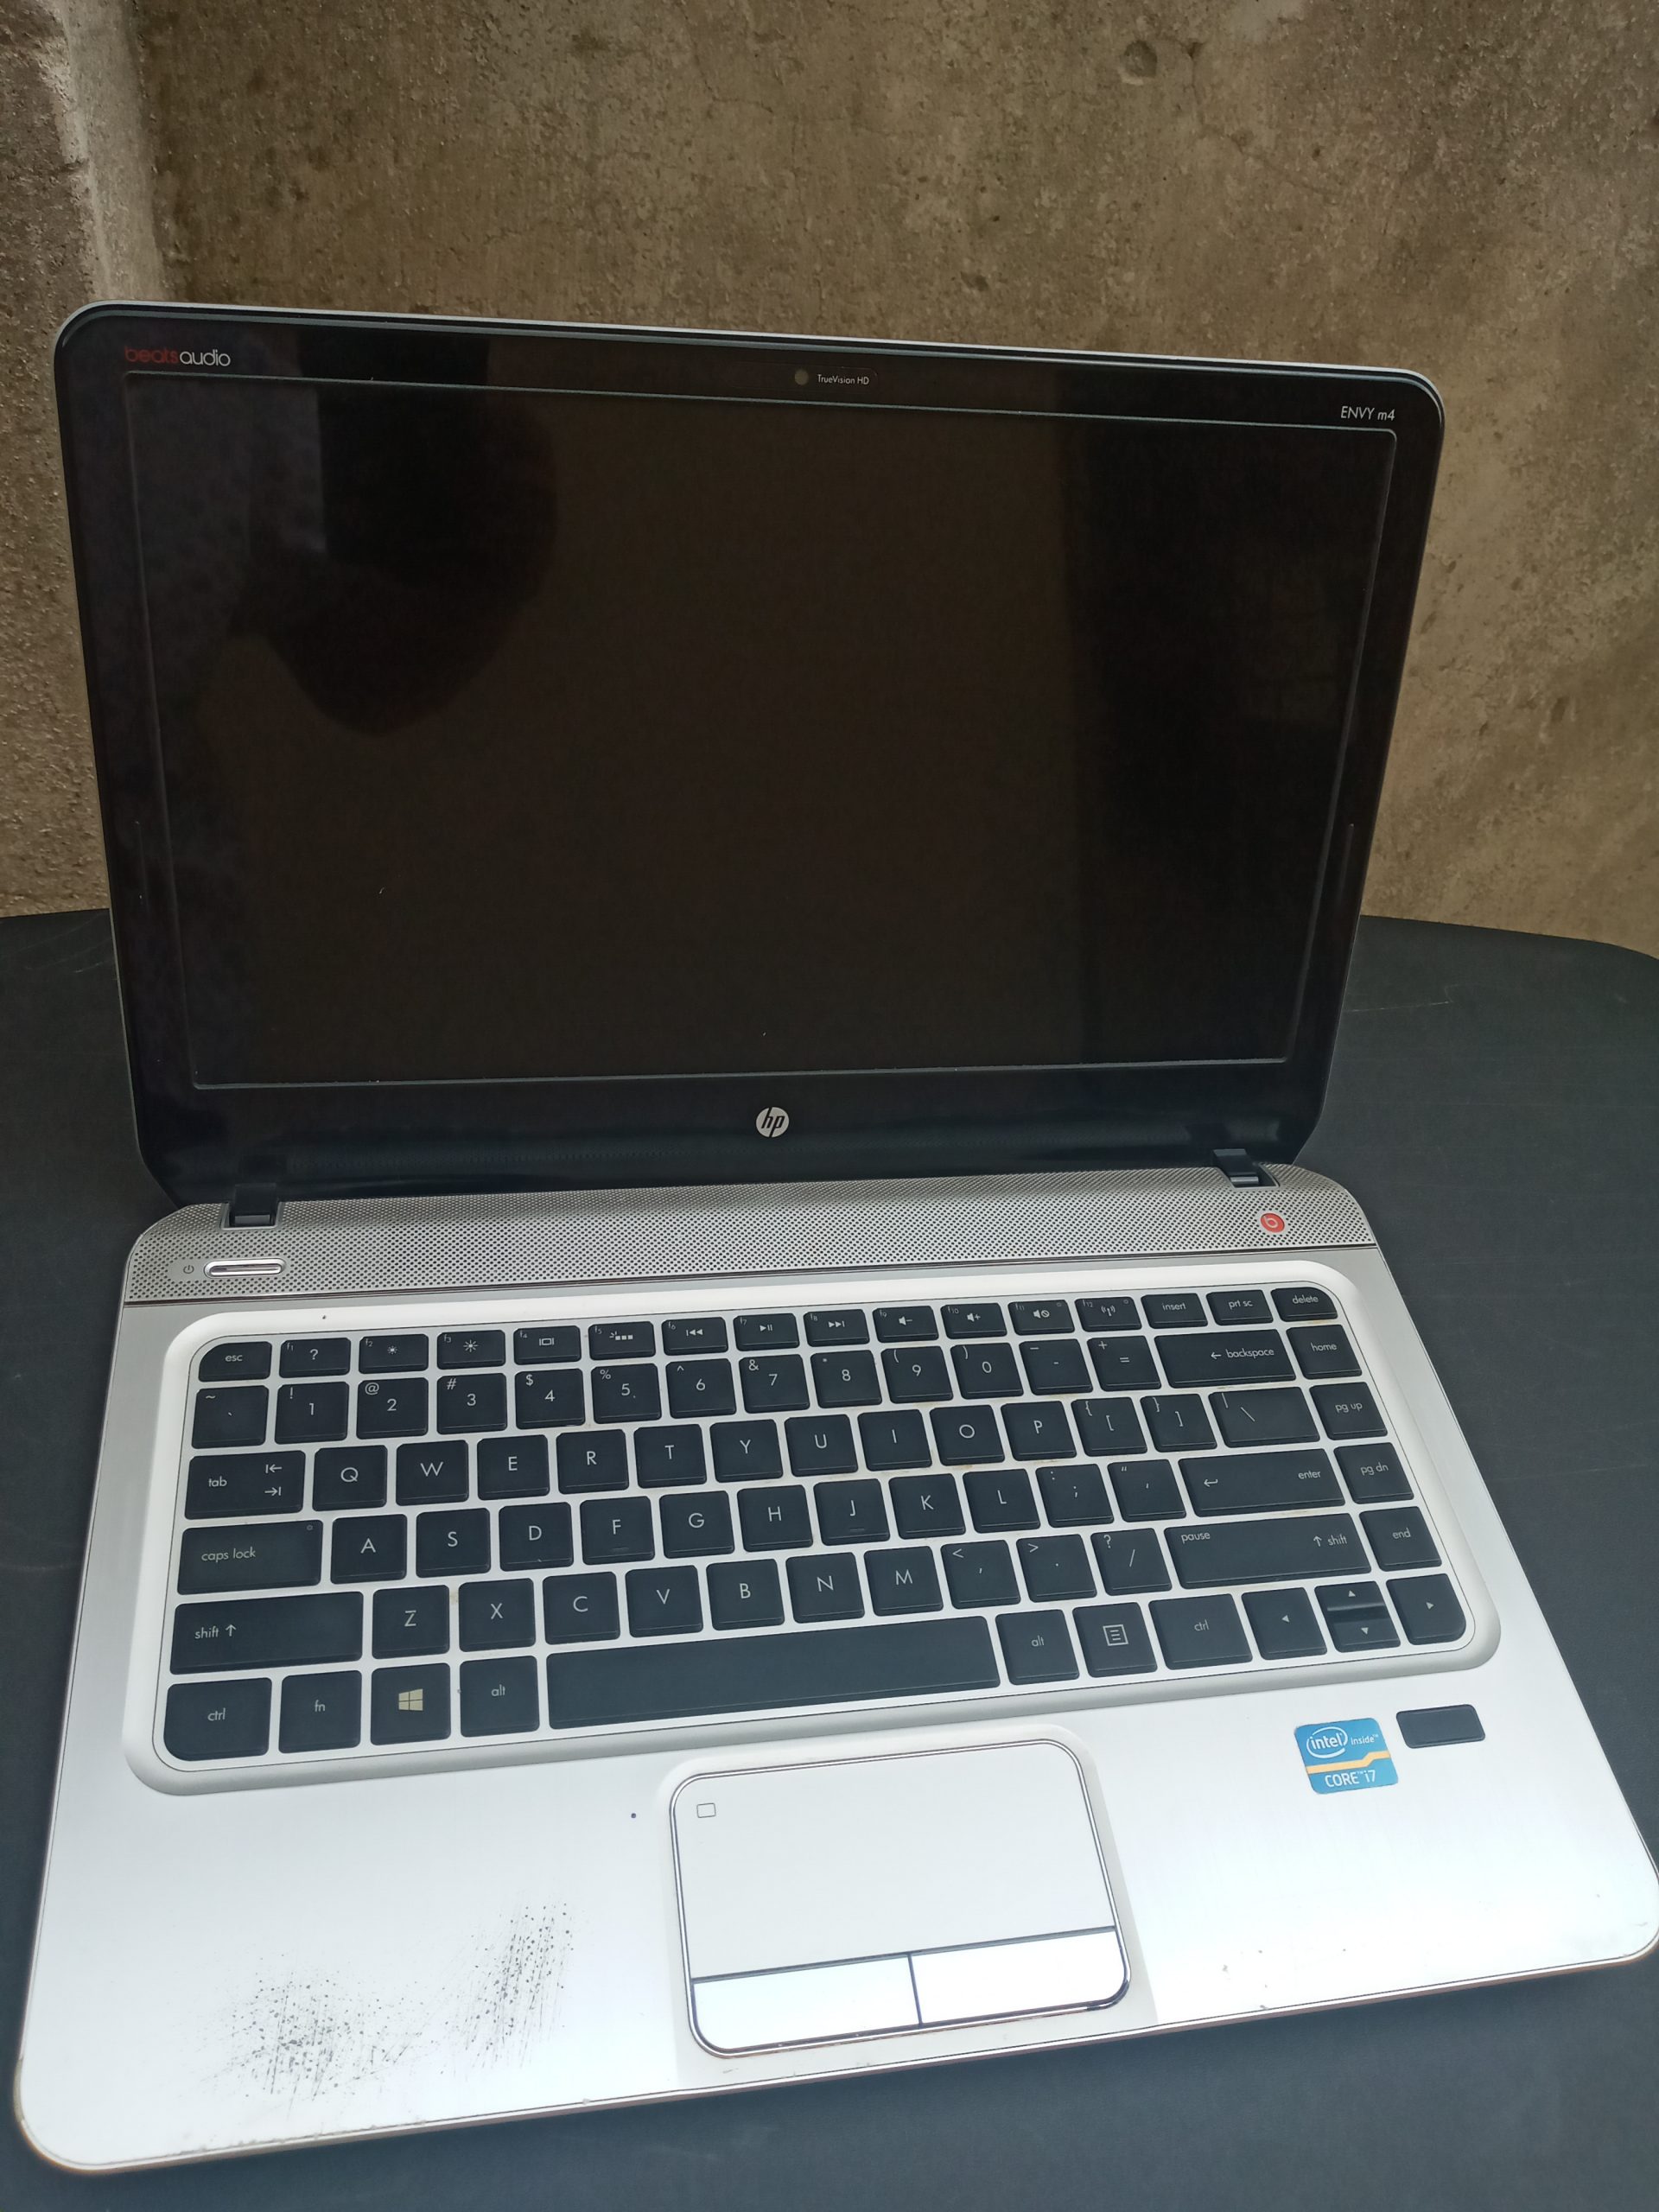 uk used laptop, london used laptop , Original laptop , computer shop in lagos , laptop for sale in lagos , computer stores in lagos nigeria , wholesale computer shop in lagos nigeria , laptop supply shops/store in lagos , Hp laptop for sale , dell laptops for sale , buy laptops online, lenovo laptop for sale , shopeinverse store in lagos , shopinverse computer , shopinverse laptops , note books computers , second hand laptop, hp envy m6 core i7 for sale cheap laptop for sale in lagos , laptop charger for sale in lagos, original wholes sale laptop charger for sale in lagos computer village nigeria laptop repair shop in lagos, gbn mobile computers , gbn mobile laptops /computers store, computer village lagos ikeja shops , laptops for sale in computer village , cheap laptops in computer village , laptop warehouse in lagos nigeria, computer warehouse in ikeja computer , buy/swap laptops in ikeja computer village , laptop pay on delivery in lagos ikeja , laptops with good Guarantee /warranty shop in lagos